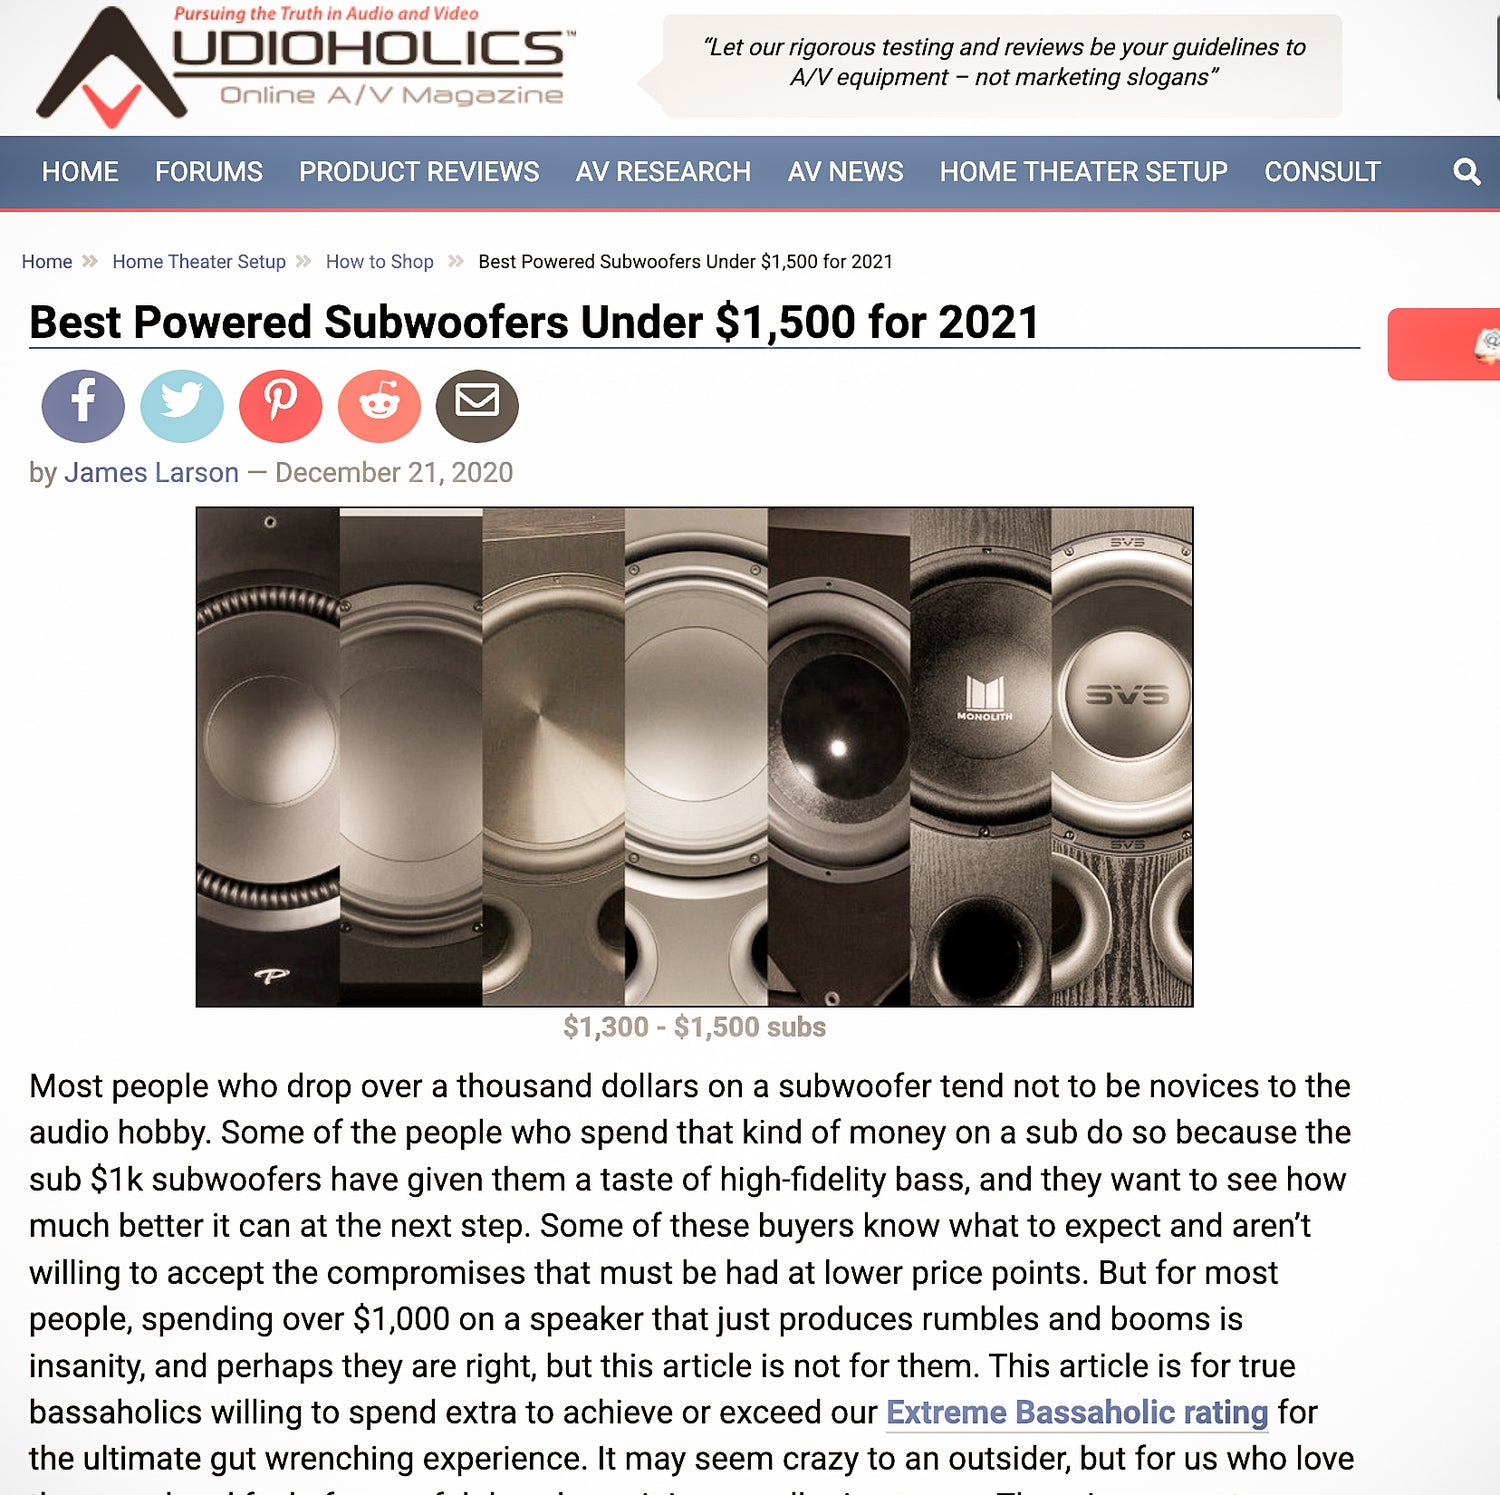 Best Powered Subwoofers Under $1,500 for 2021